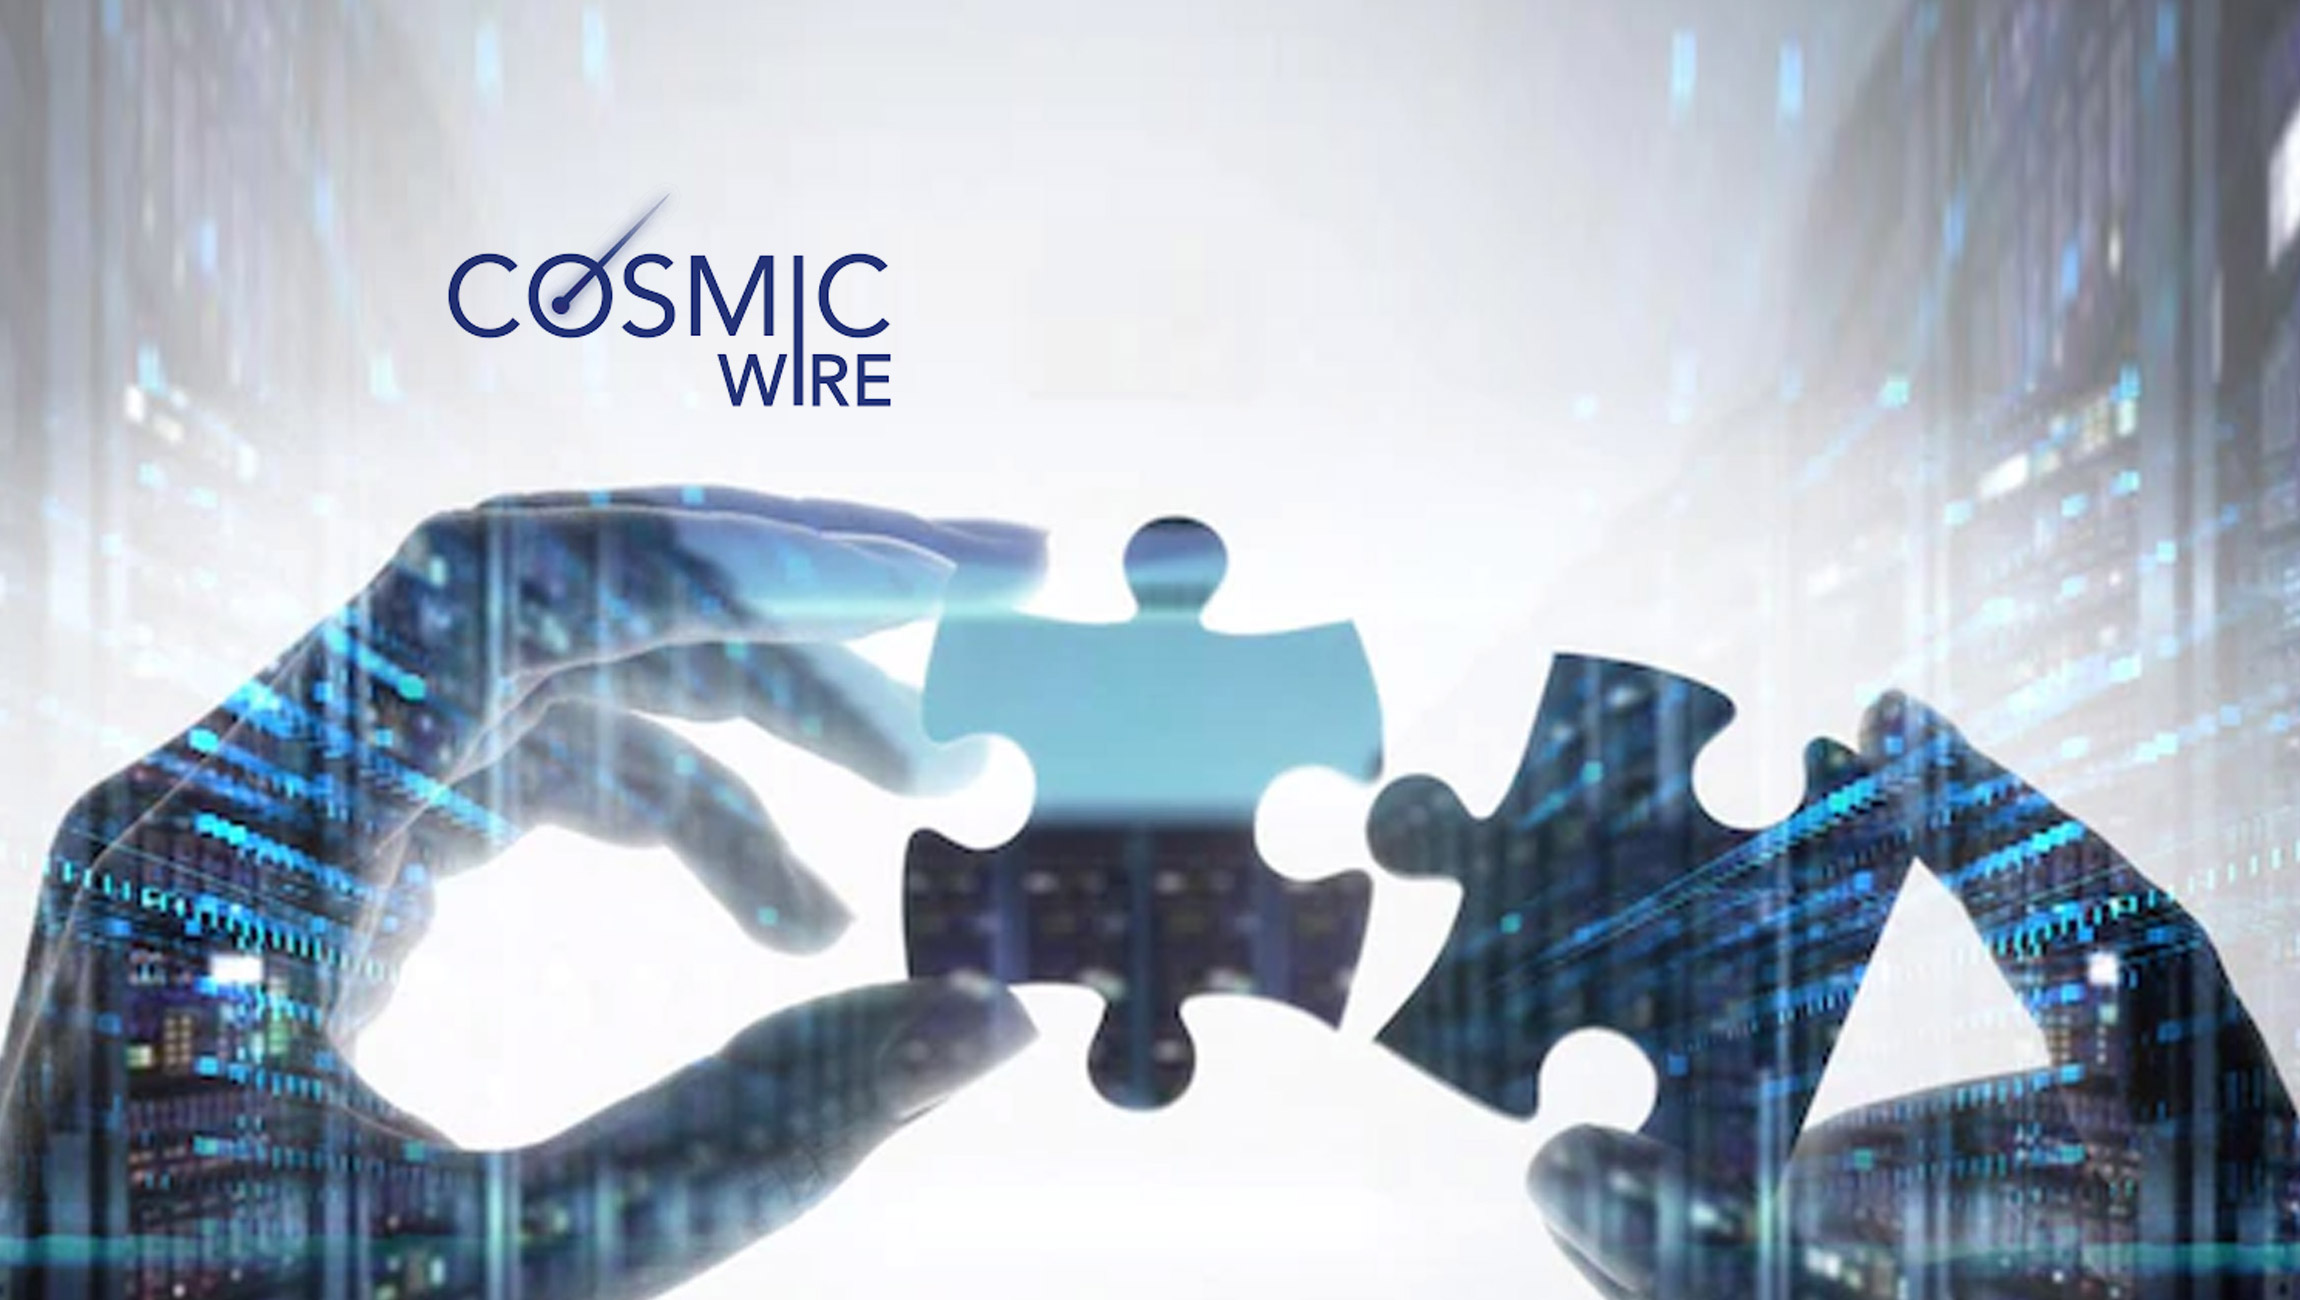 Cosmic Wire secures $30 million in funding to advance its cross-chain Web3 platform expansion.